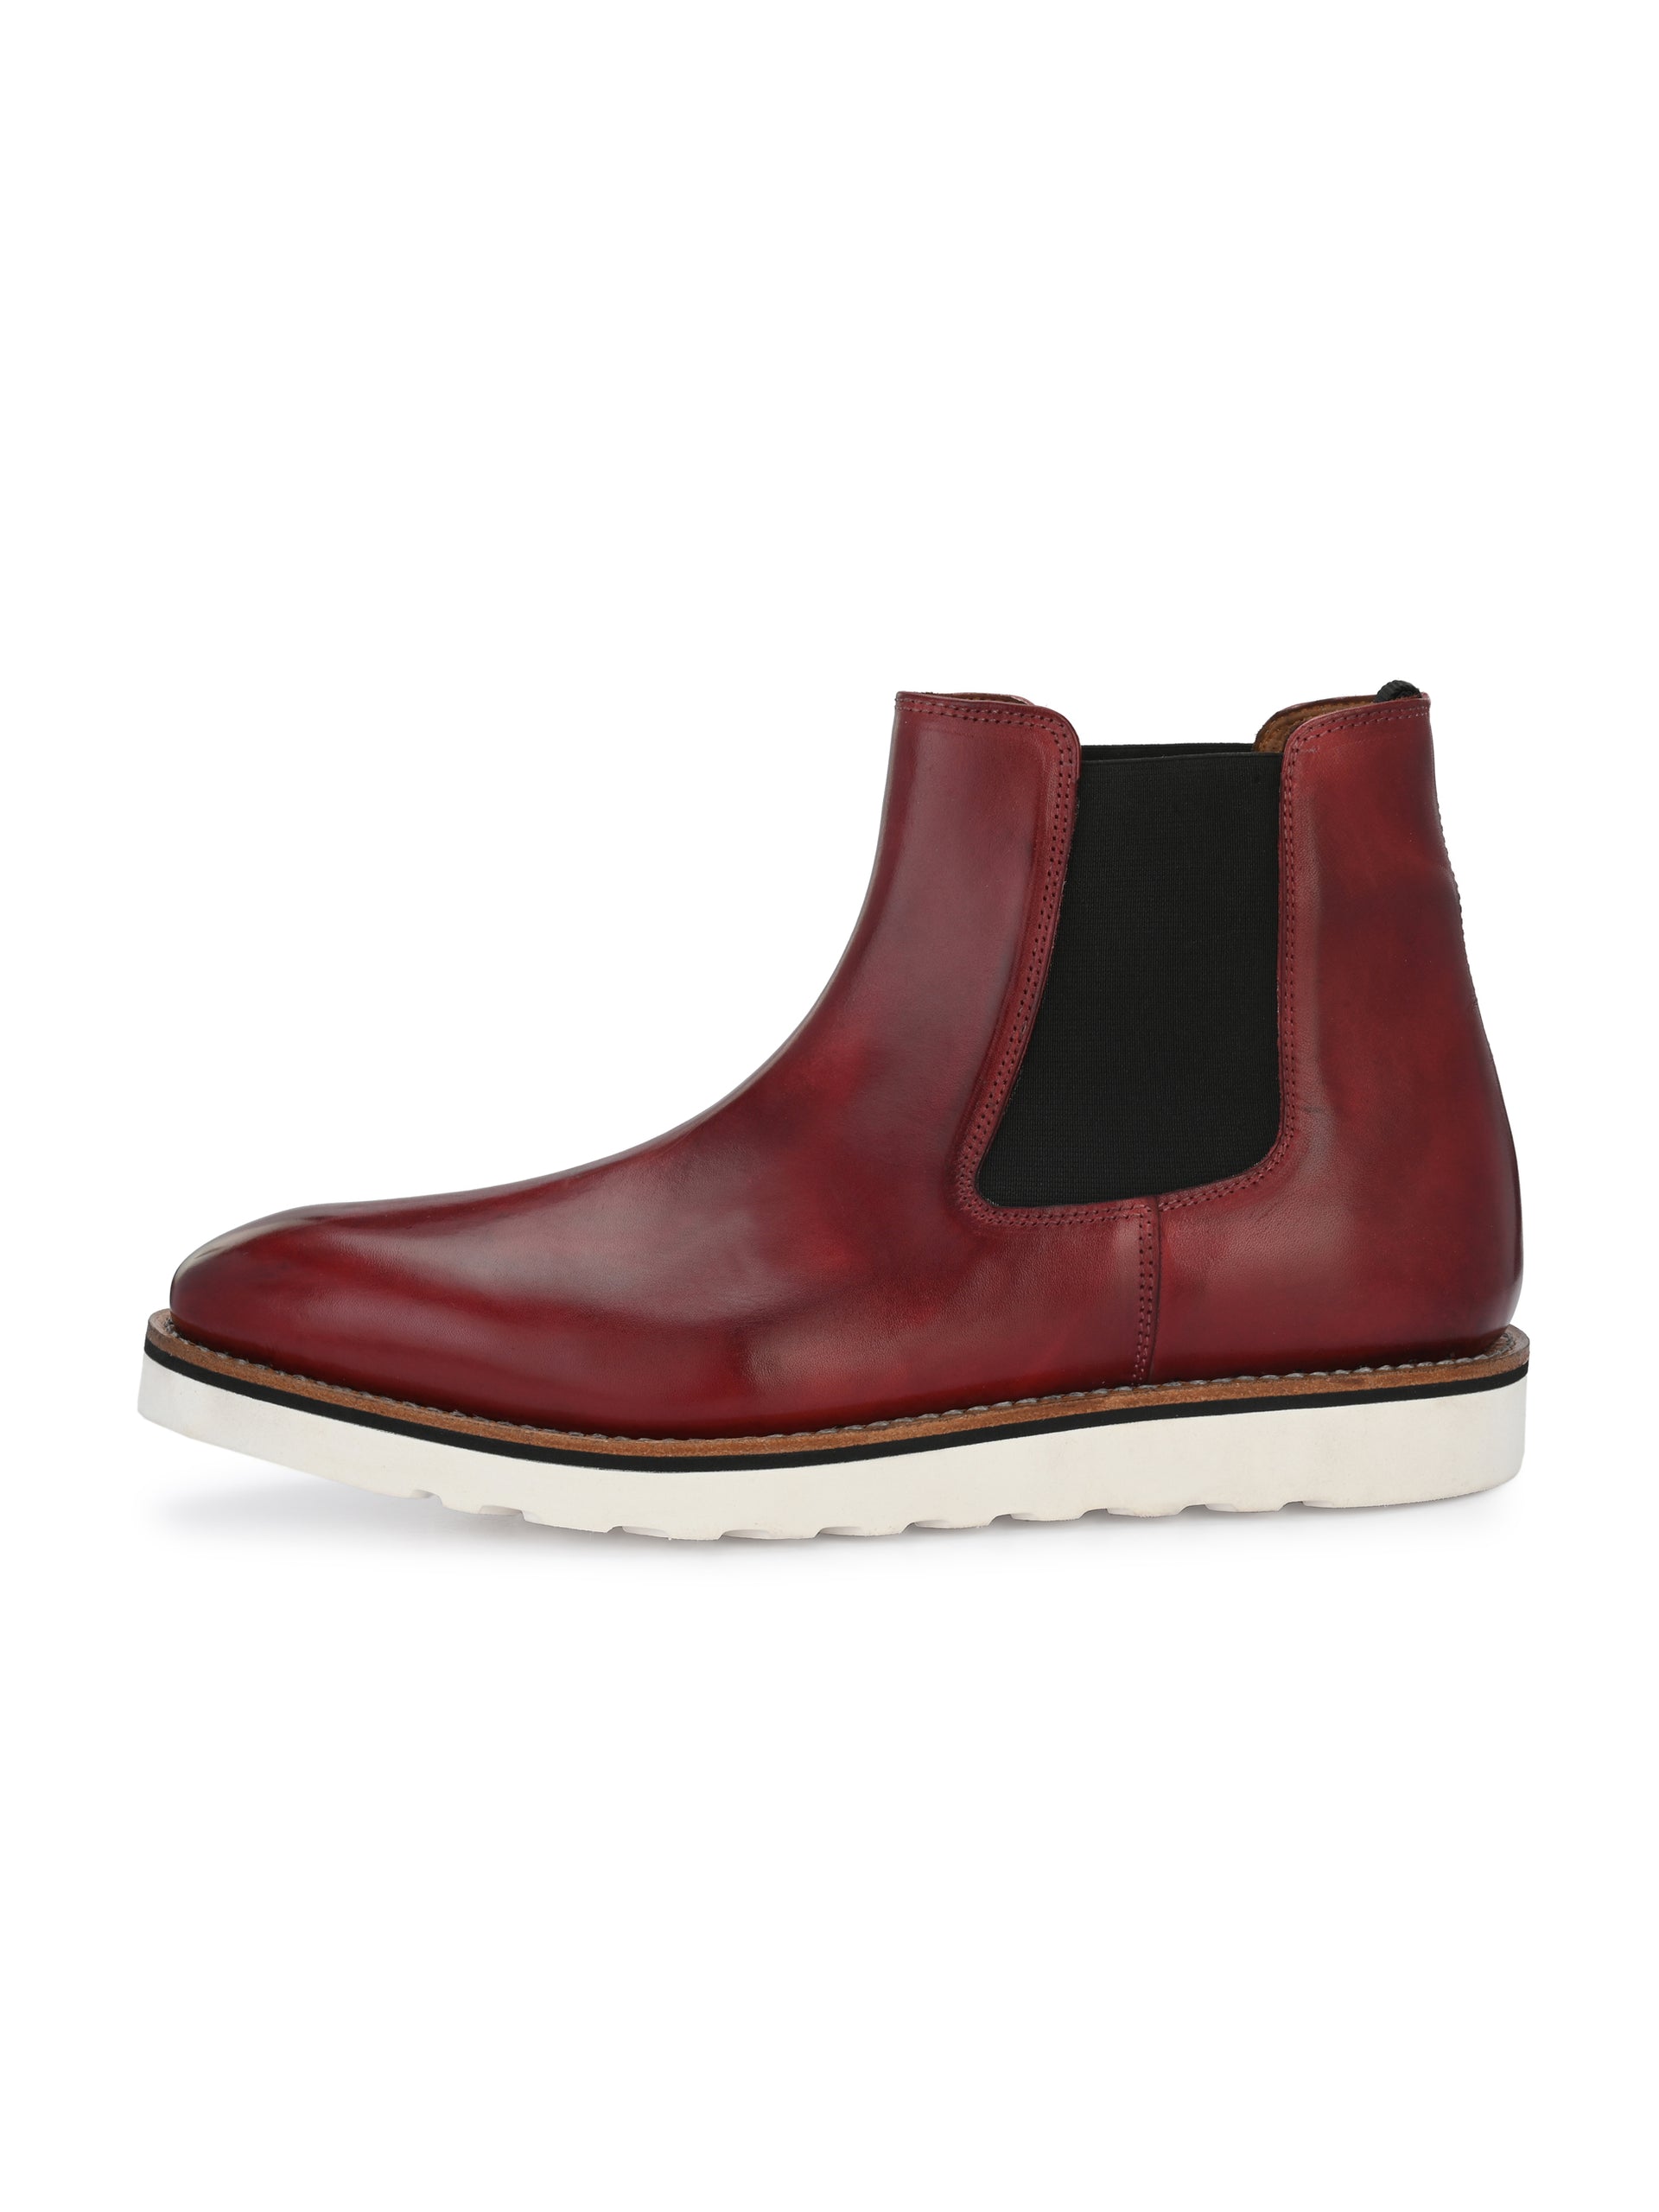 Henry Goodyear Welted Light Weight Chelsea Boot